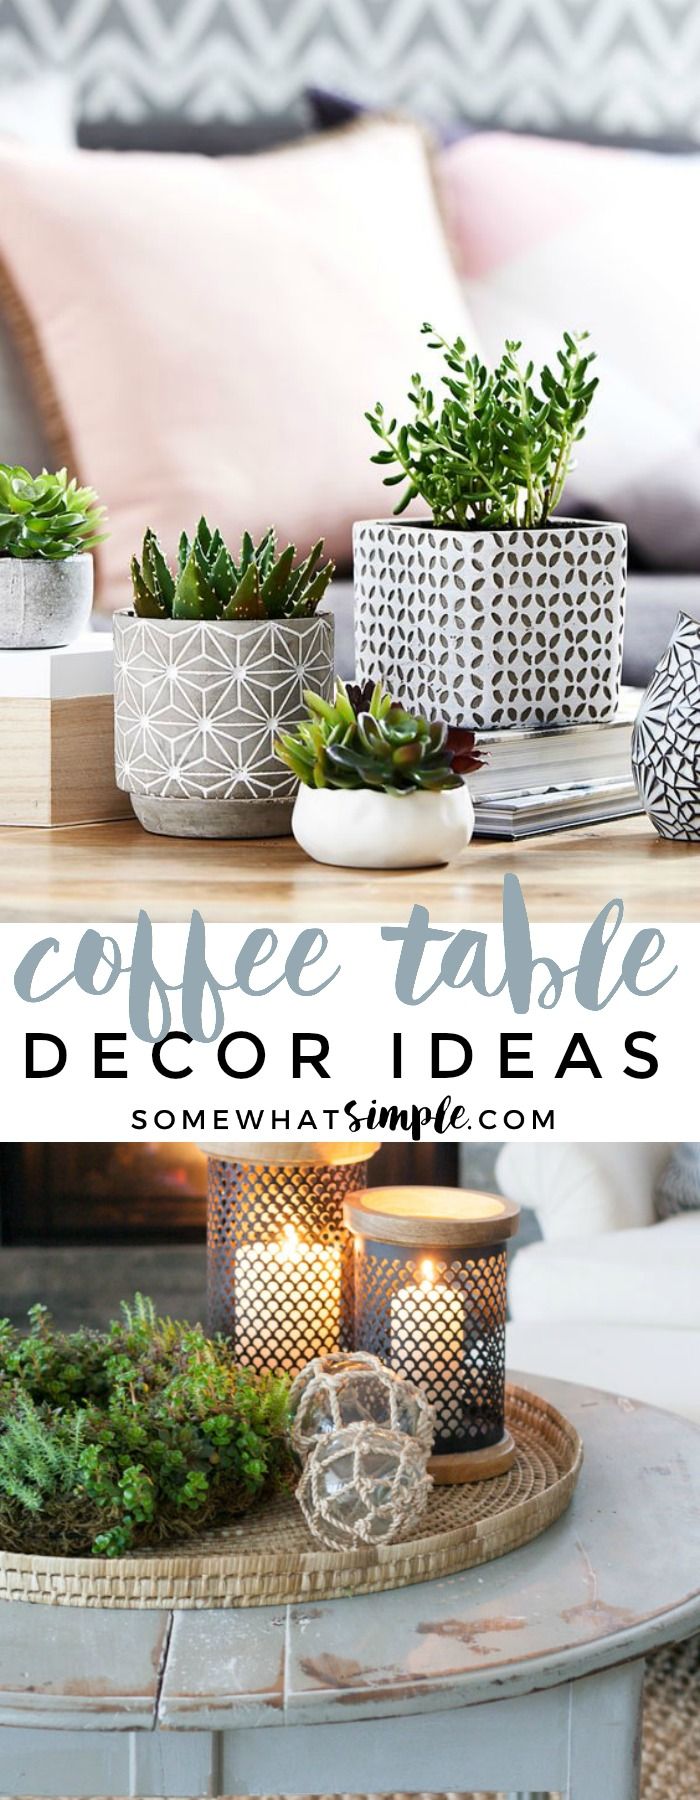 5 Styling Tips and Coffee Table Decor Ideas